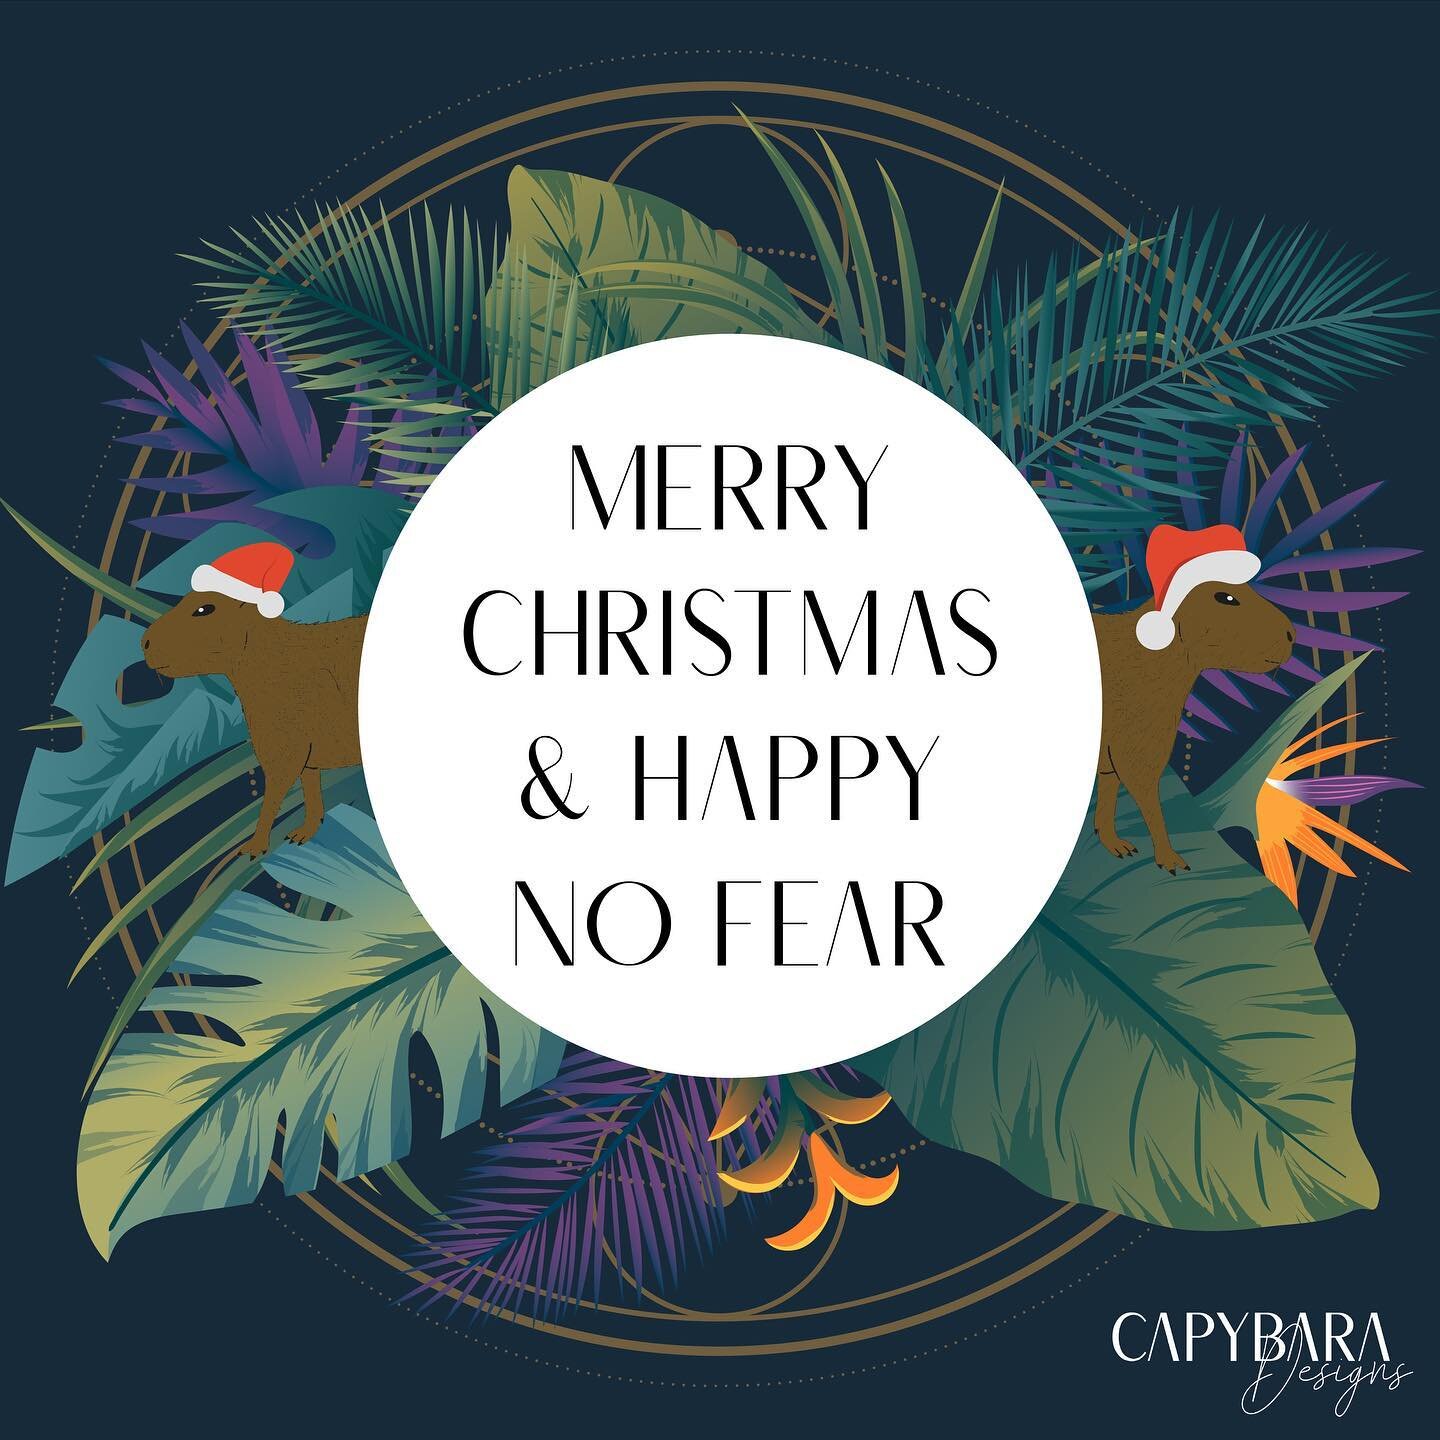 Merry Christmas Everyone!!! And don&rsquo;t worry the Universe has got your back! You will not be sent anything in 2021 that you can&rsquo;t handle! So enter it with no fear!! Be a Capybara!!! #capybara #junglevibes #2021 #nofear #theuniversehasyourb